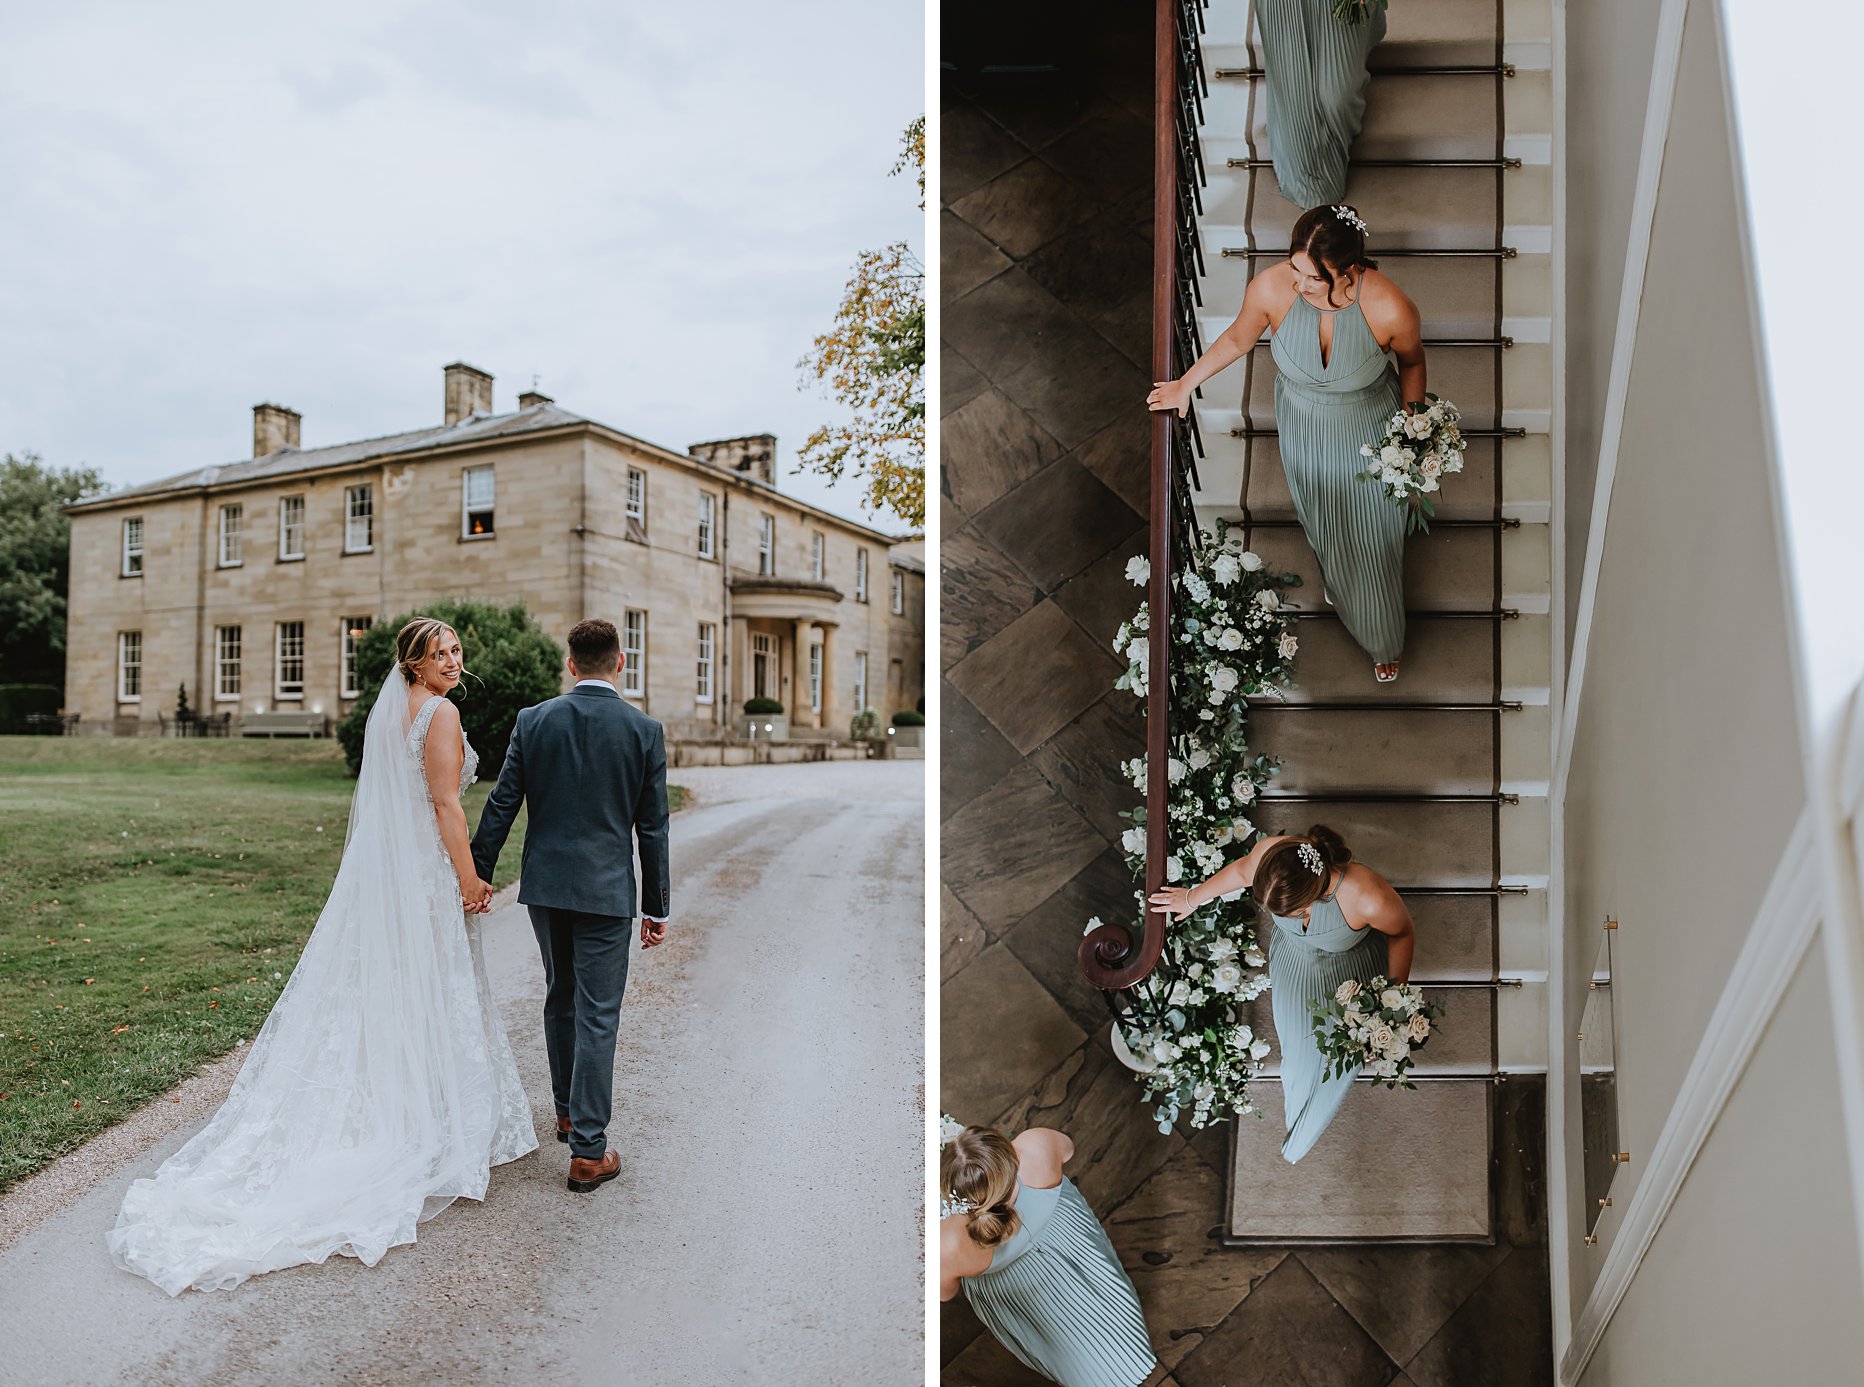 First photo shows bride and groom walking towards Saltmarshe Hall. Bride is looking over her shoulder towards the camera. Second photo shows aerial view of bridesmaids walking down the staircase at Saltmarshe Hall. They are all holding bouquets and wearing a light green dress.